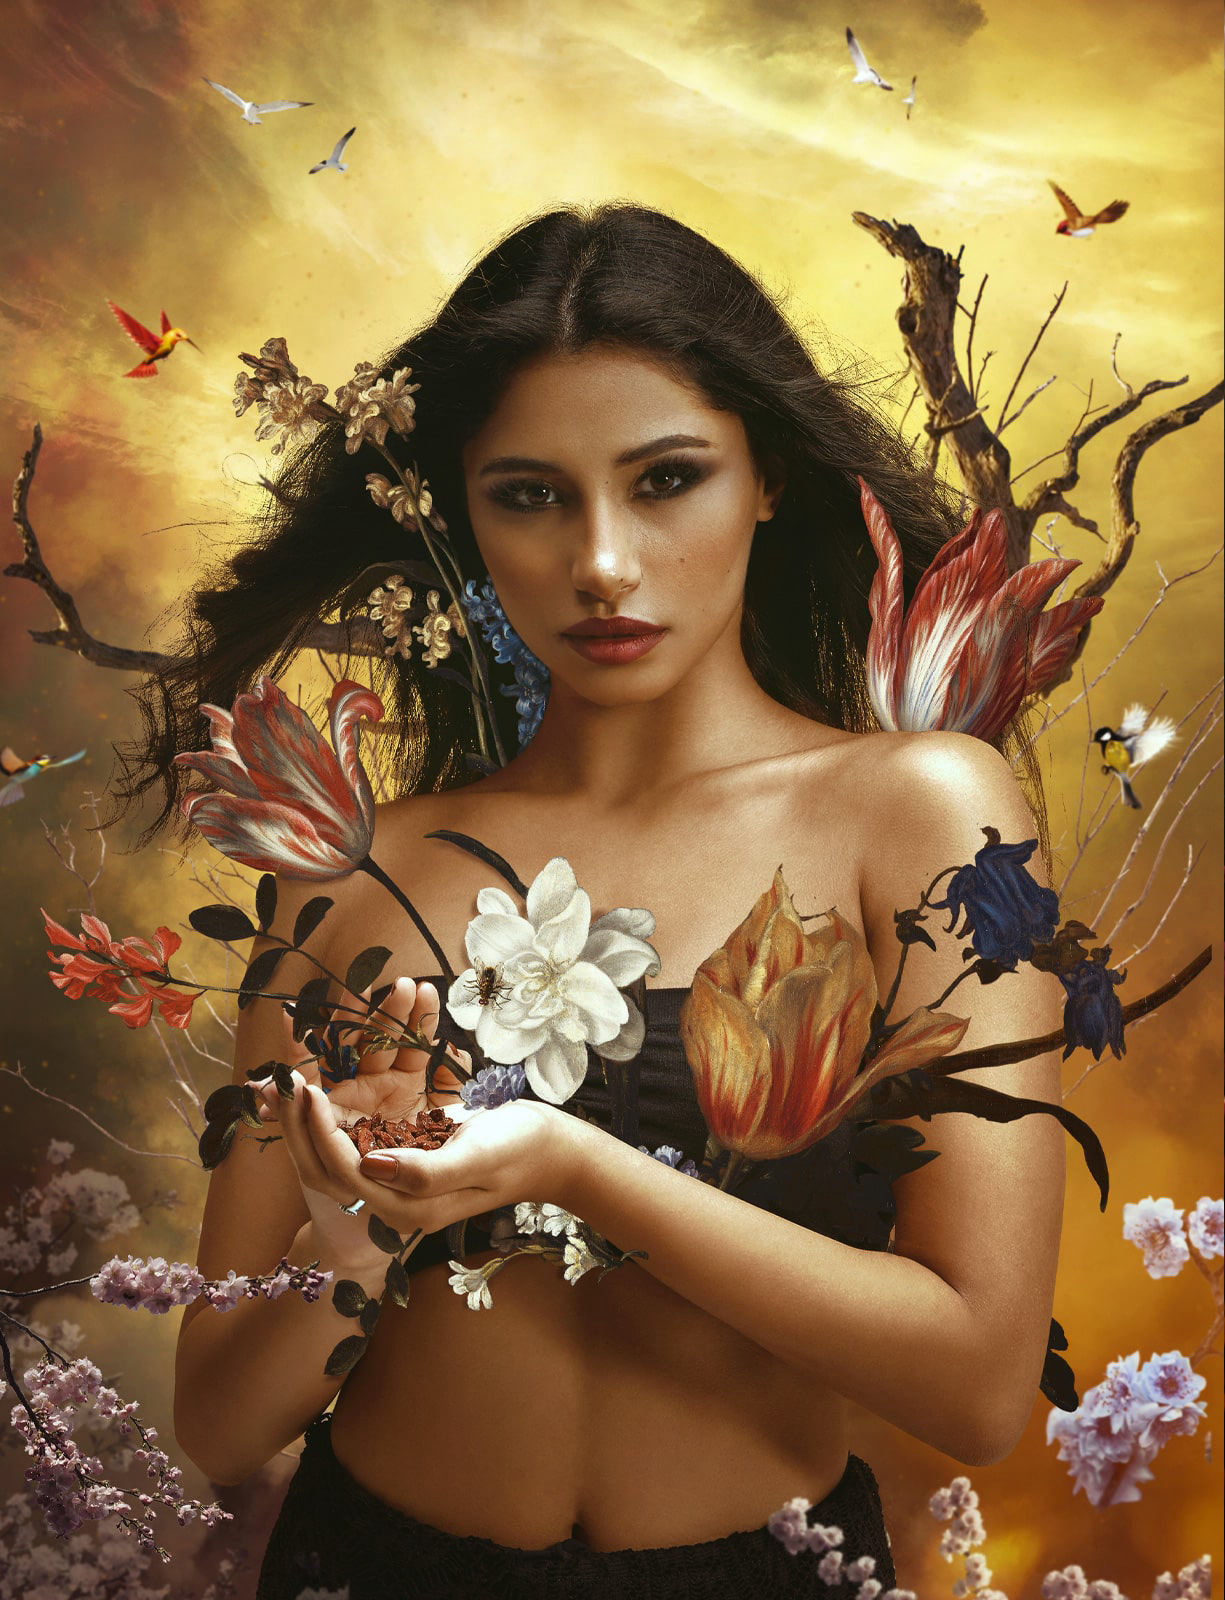 fine Art picture of a model surrounded by flowers